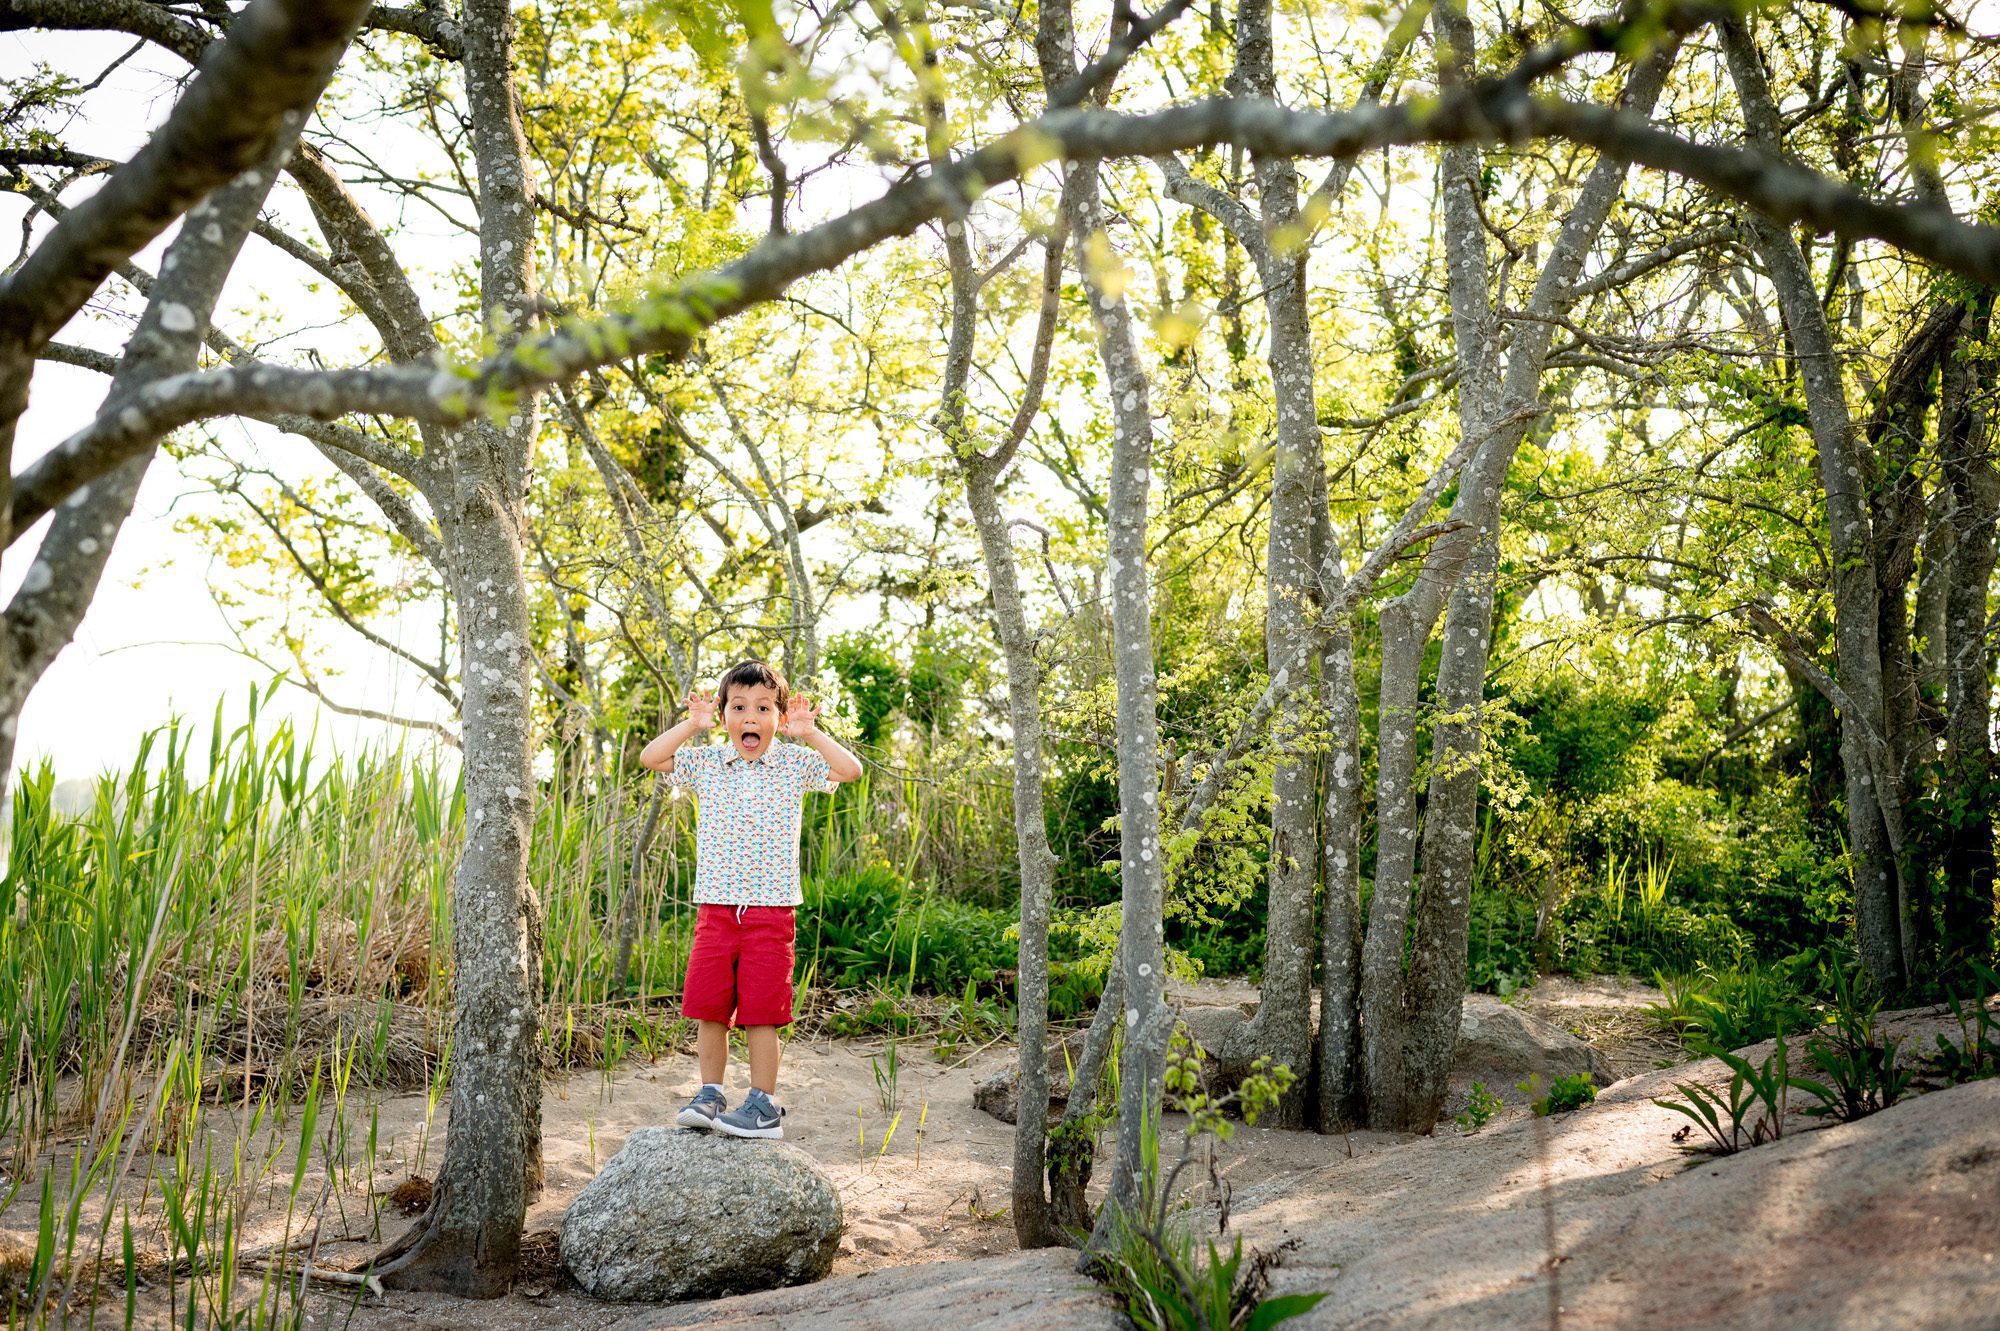 Boy playing in tree stand